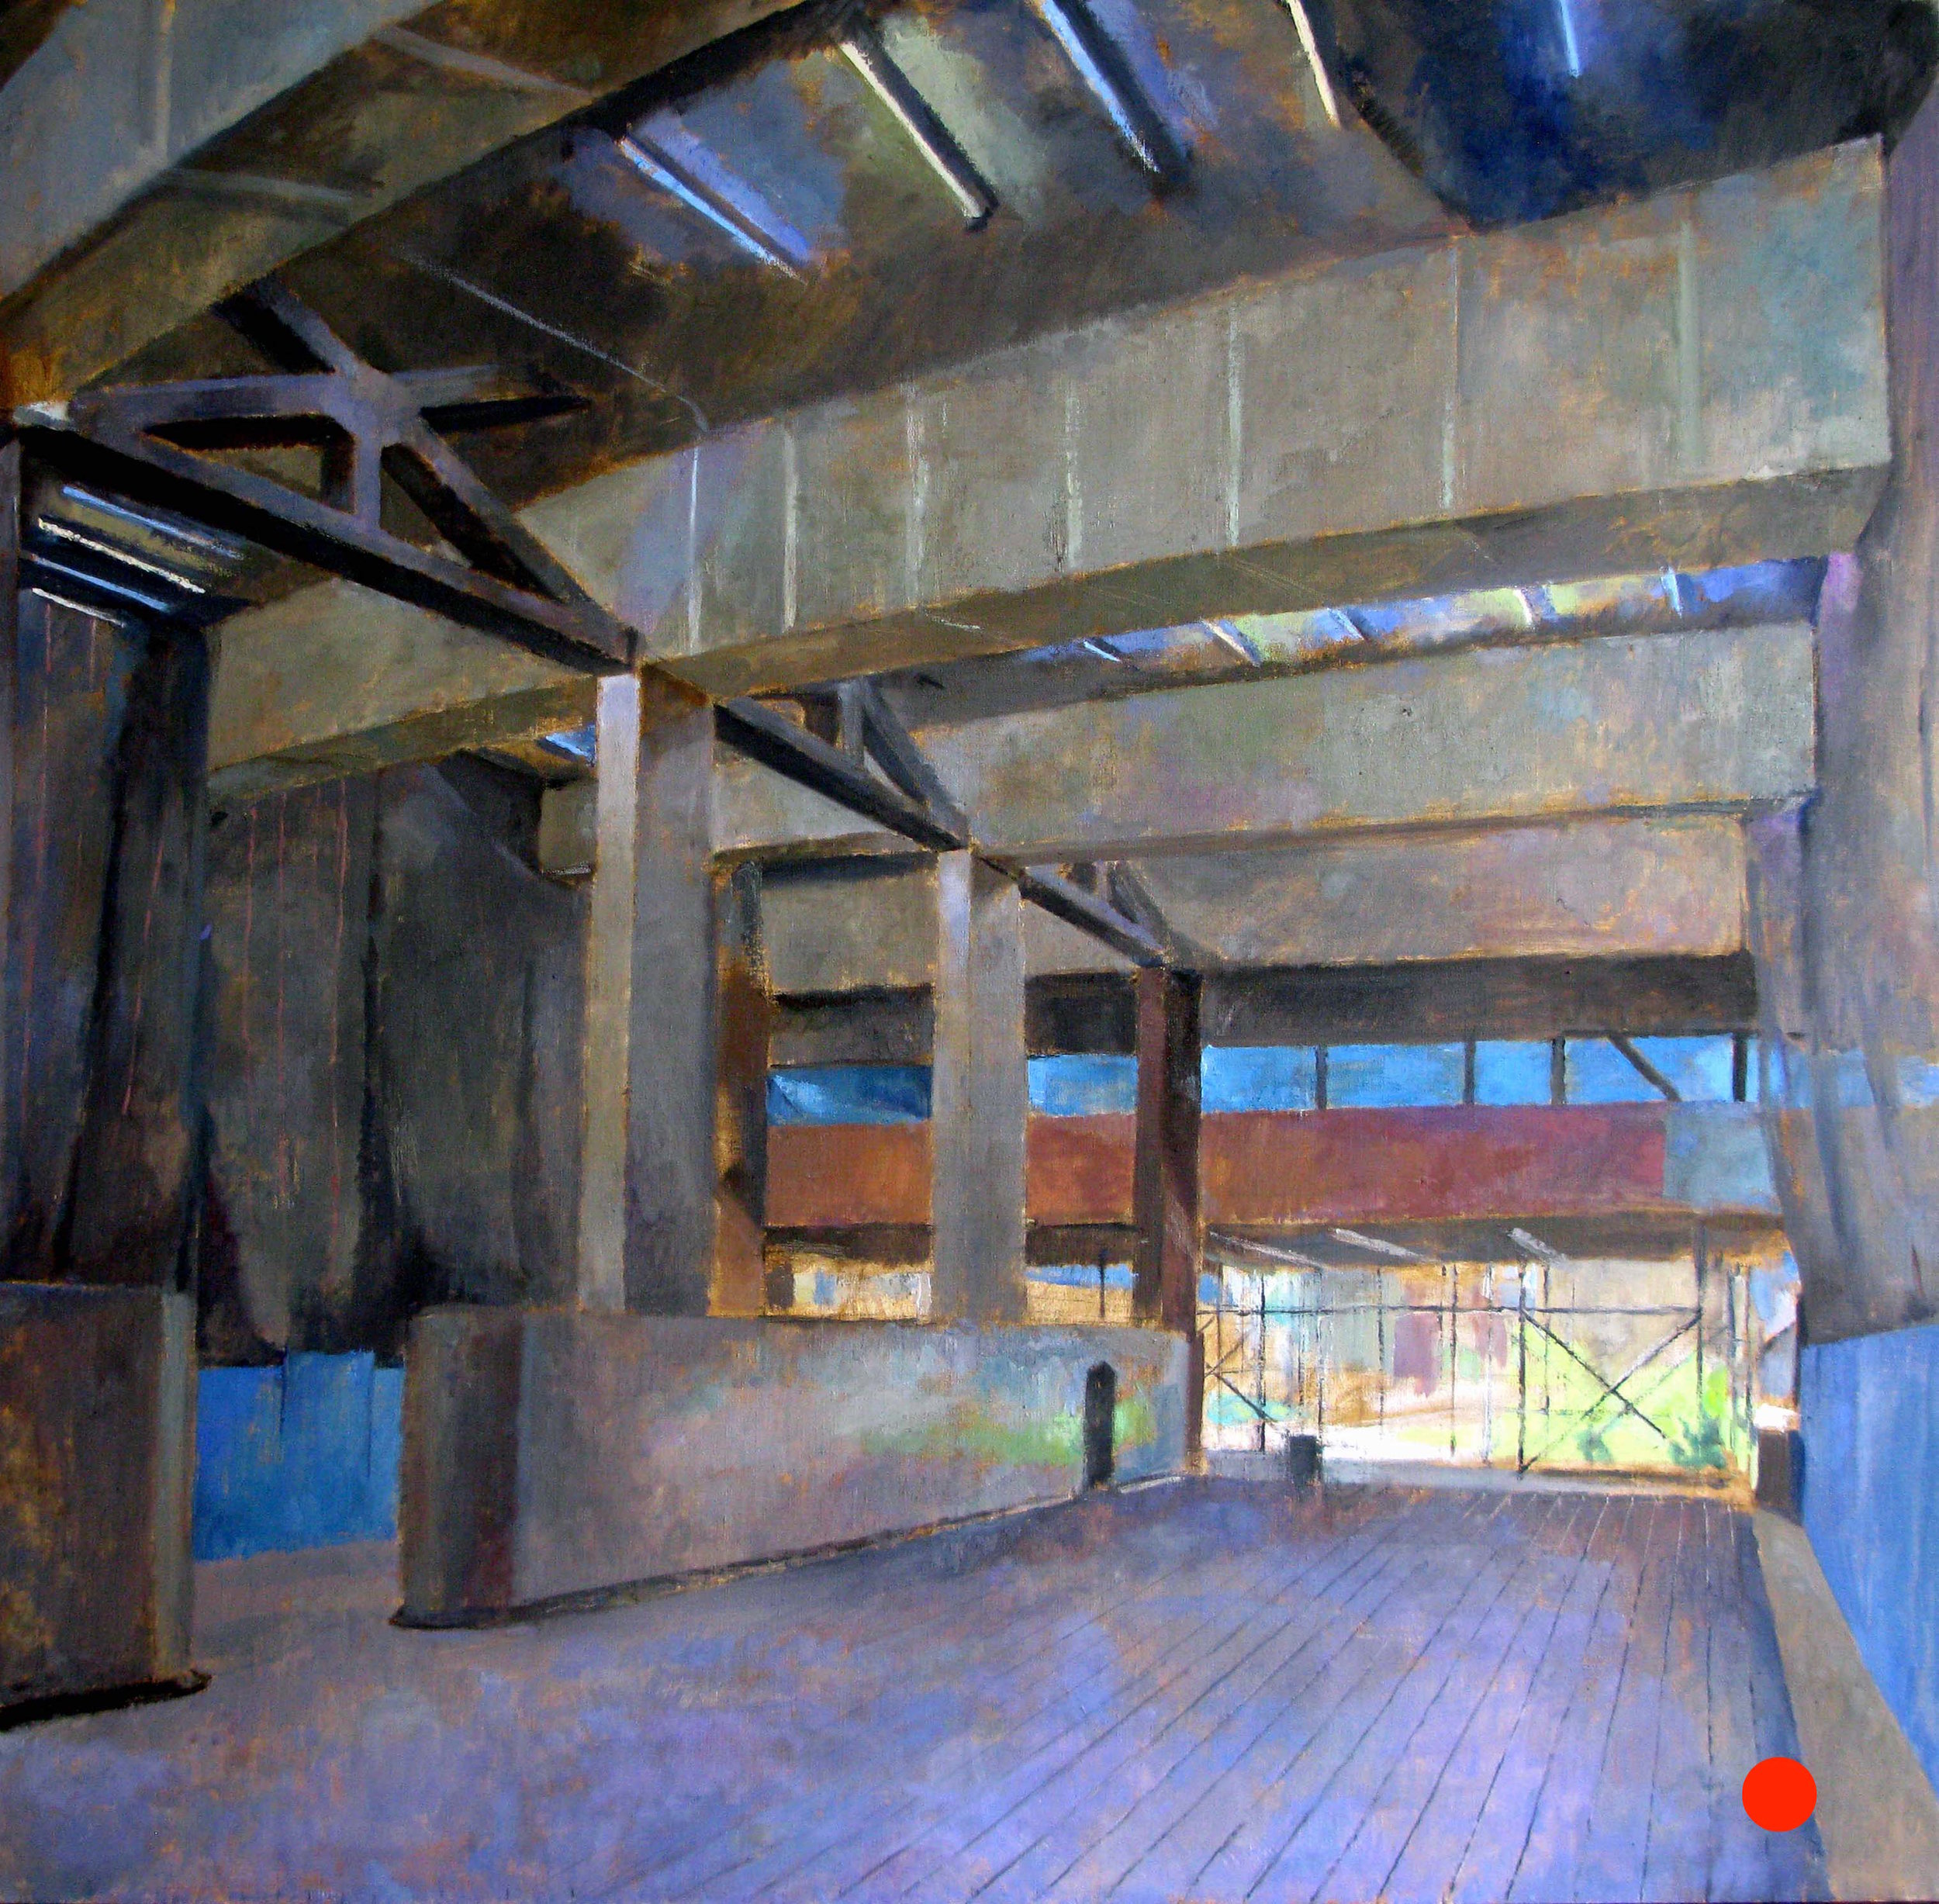 Highline Interior, 450 W 14th Street, 60 x 60 inches, oil on linen, 2009